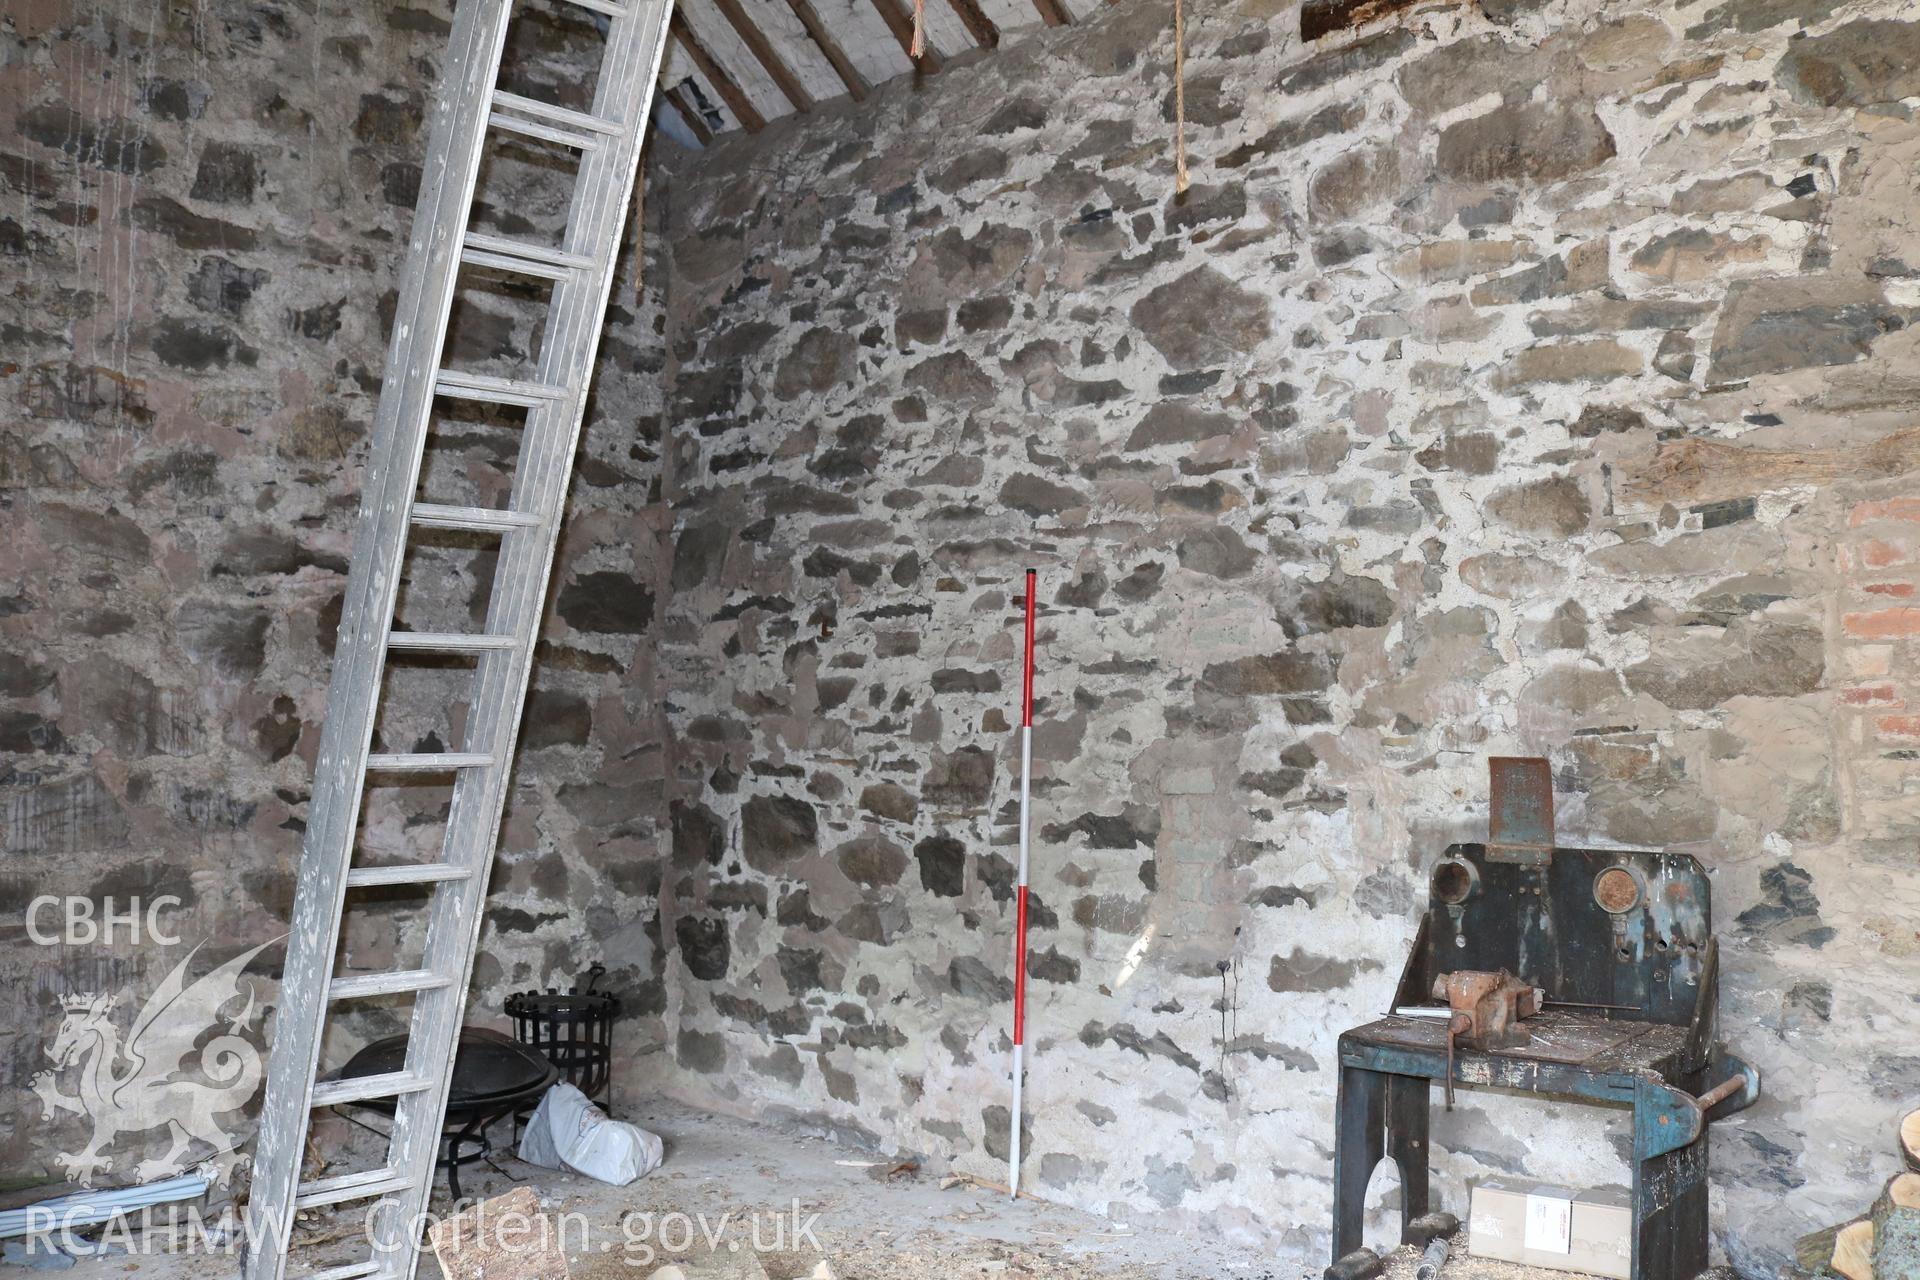 Photograph showing interior view of barn and cottage ground floor at Maes yr Hendre, taken by Dr Marian Gwyn, 6th July 2016. (Original Reference no. 0110)